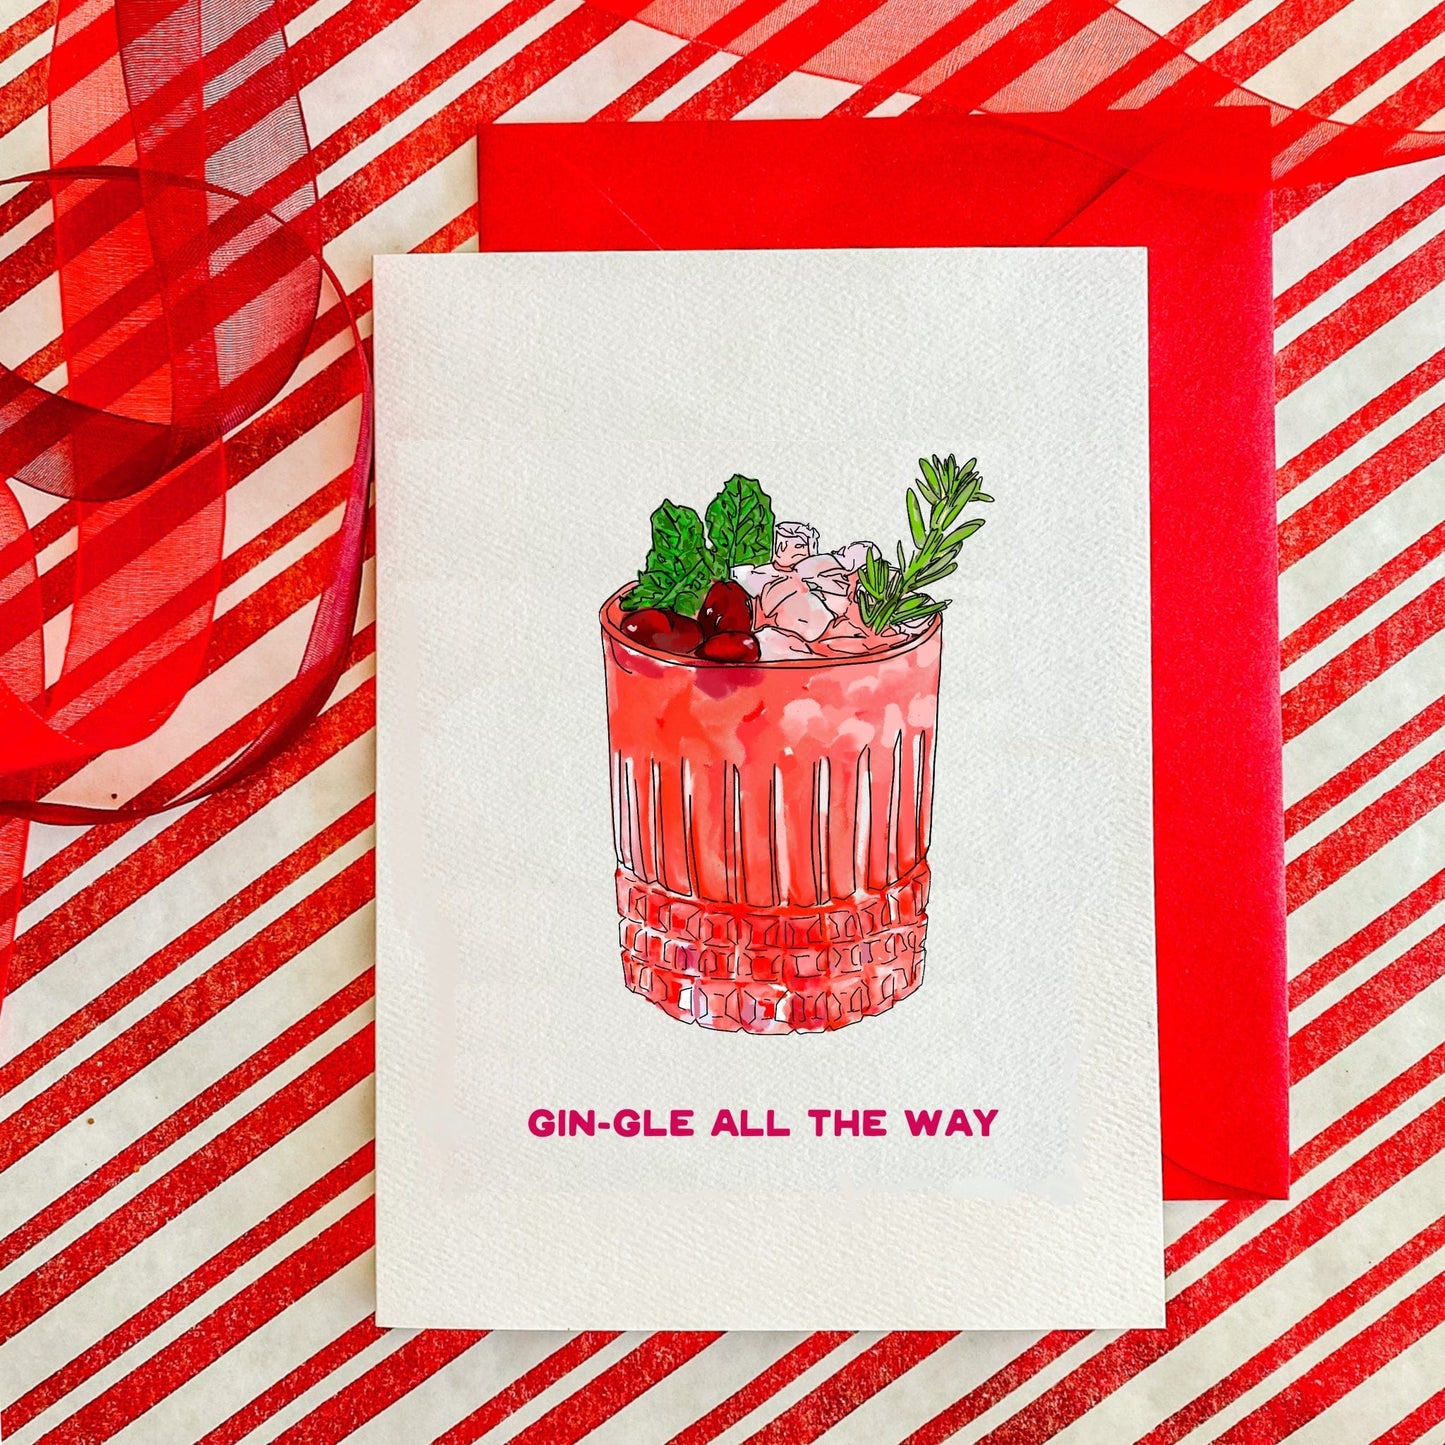 Maker Scholar Gin-gle all the way | Holiday Card